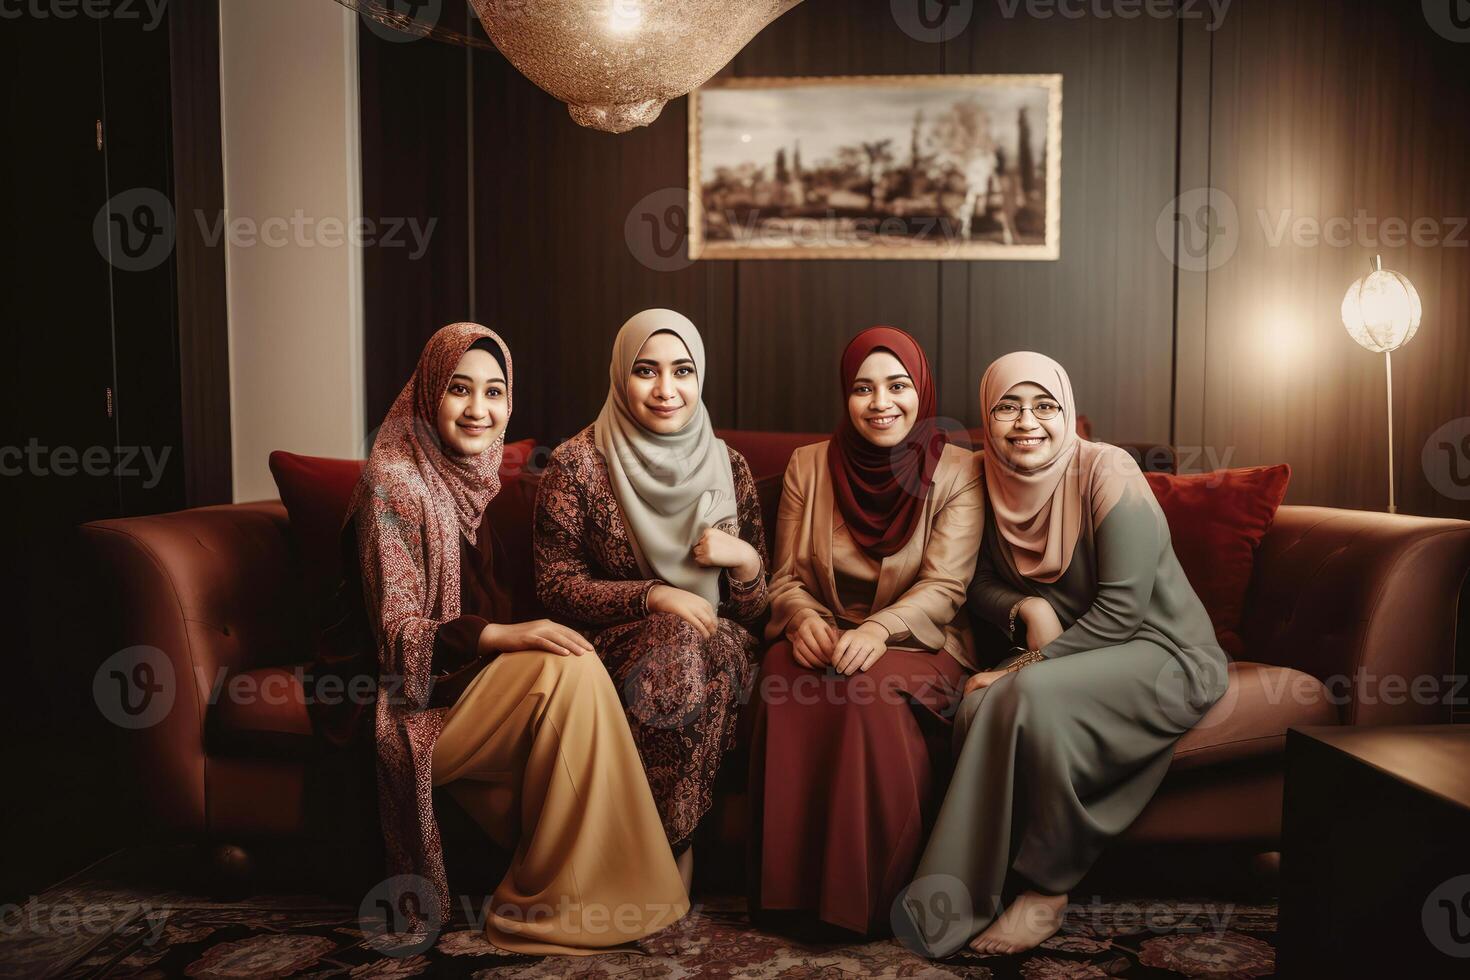 Portrait of Four Happy Muslim Women in Hijab on Sofa Looking at Camera. Islamic Festival Celebration Concept. . photo